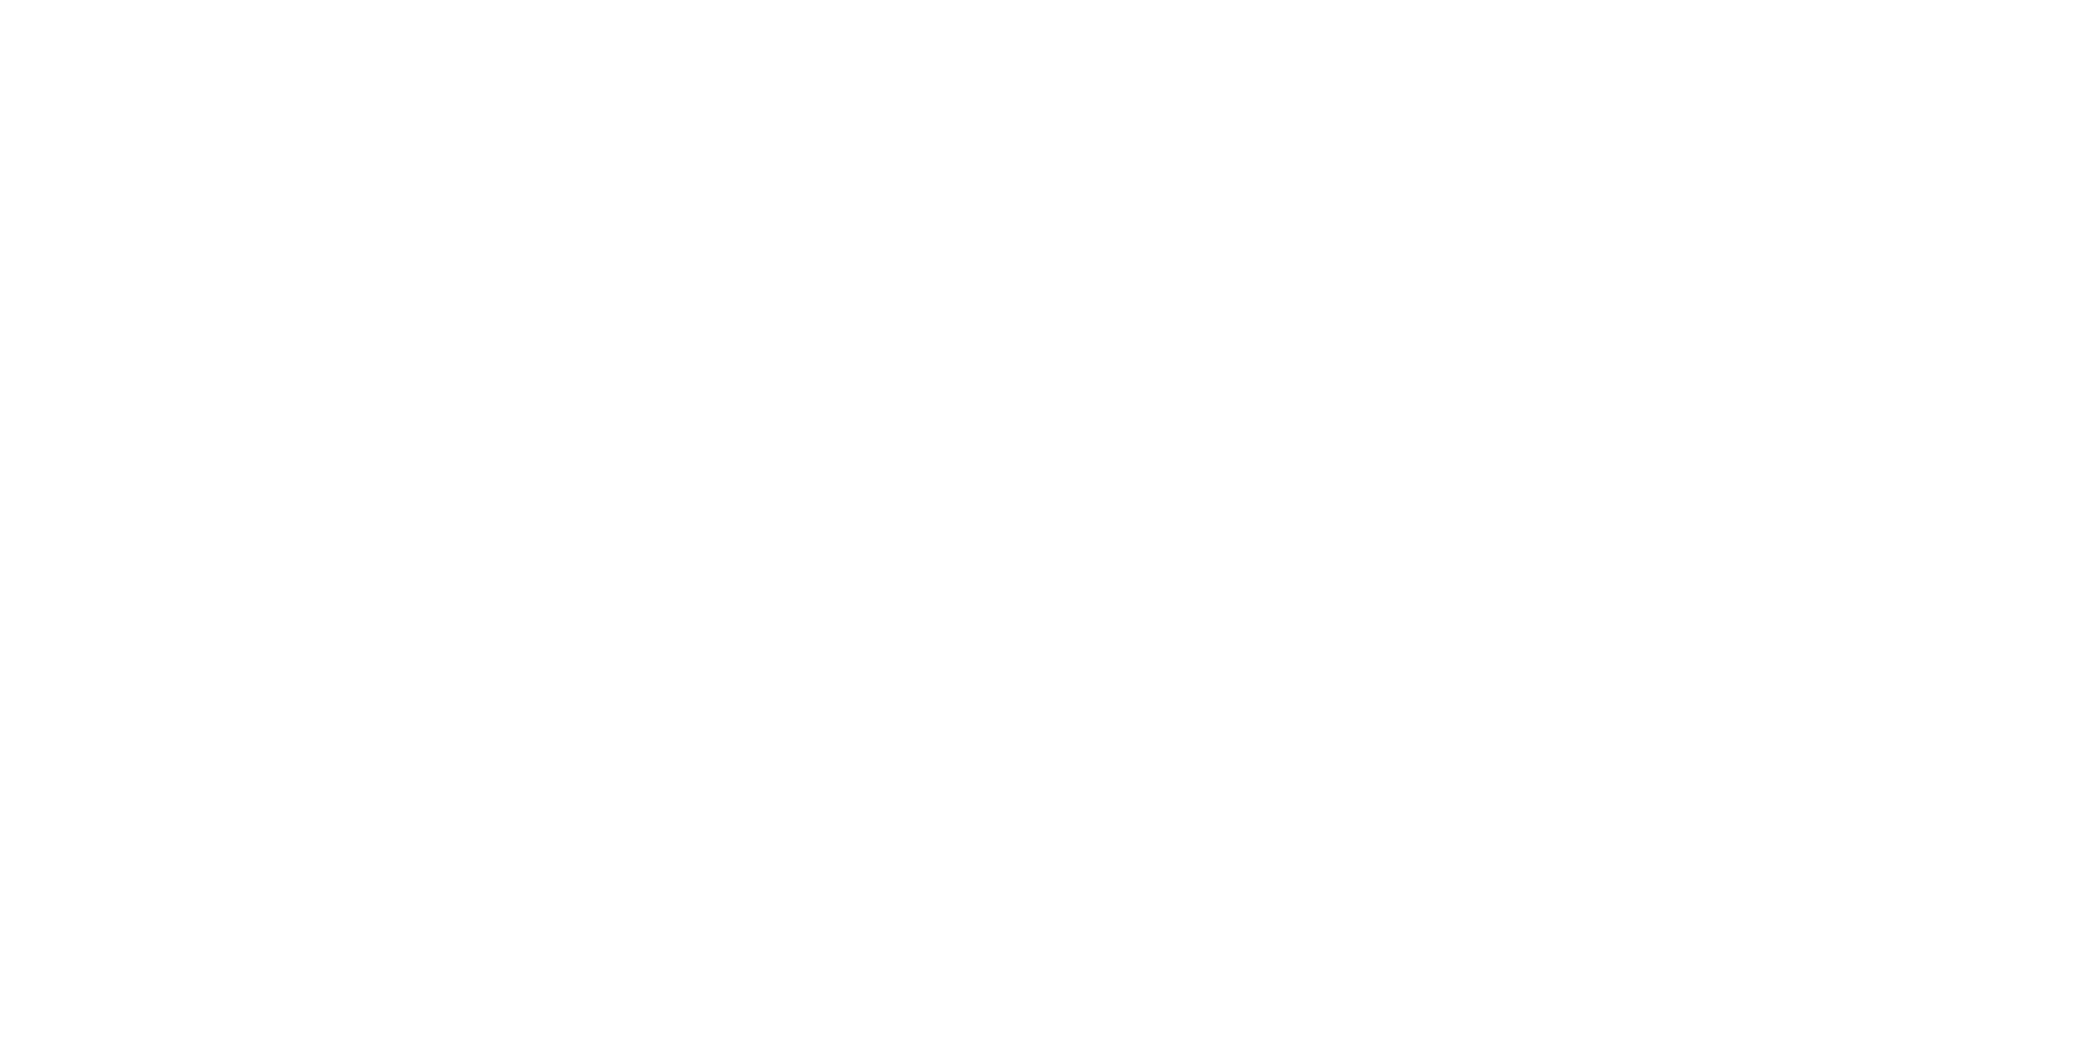 can athletic center logo